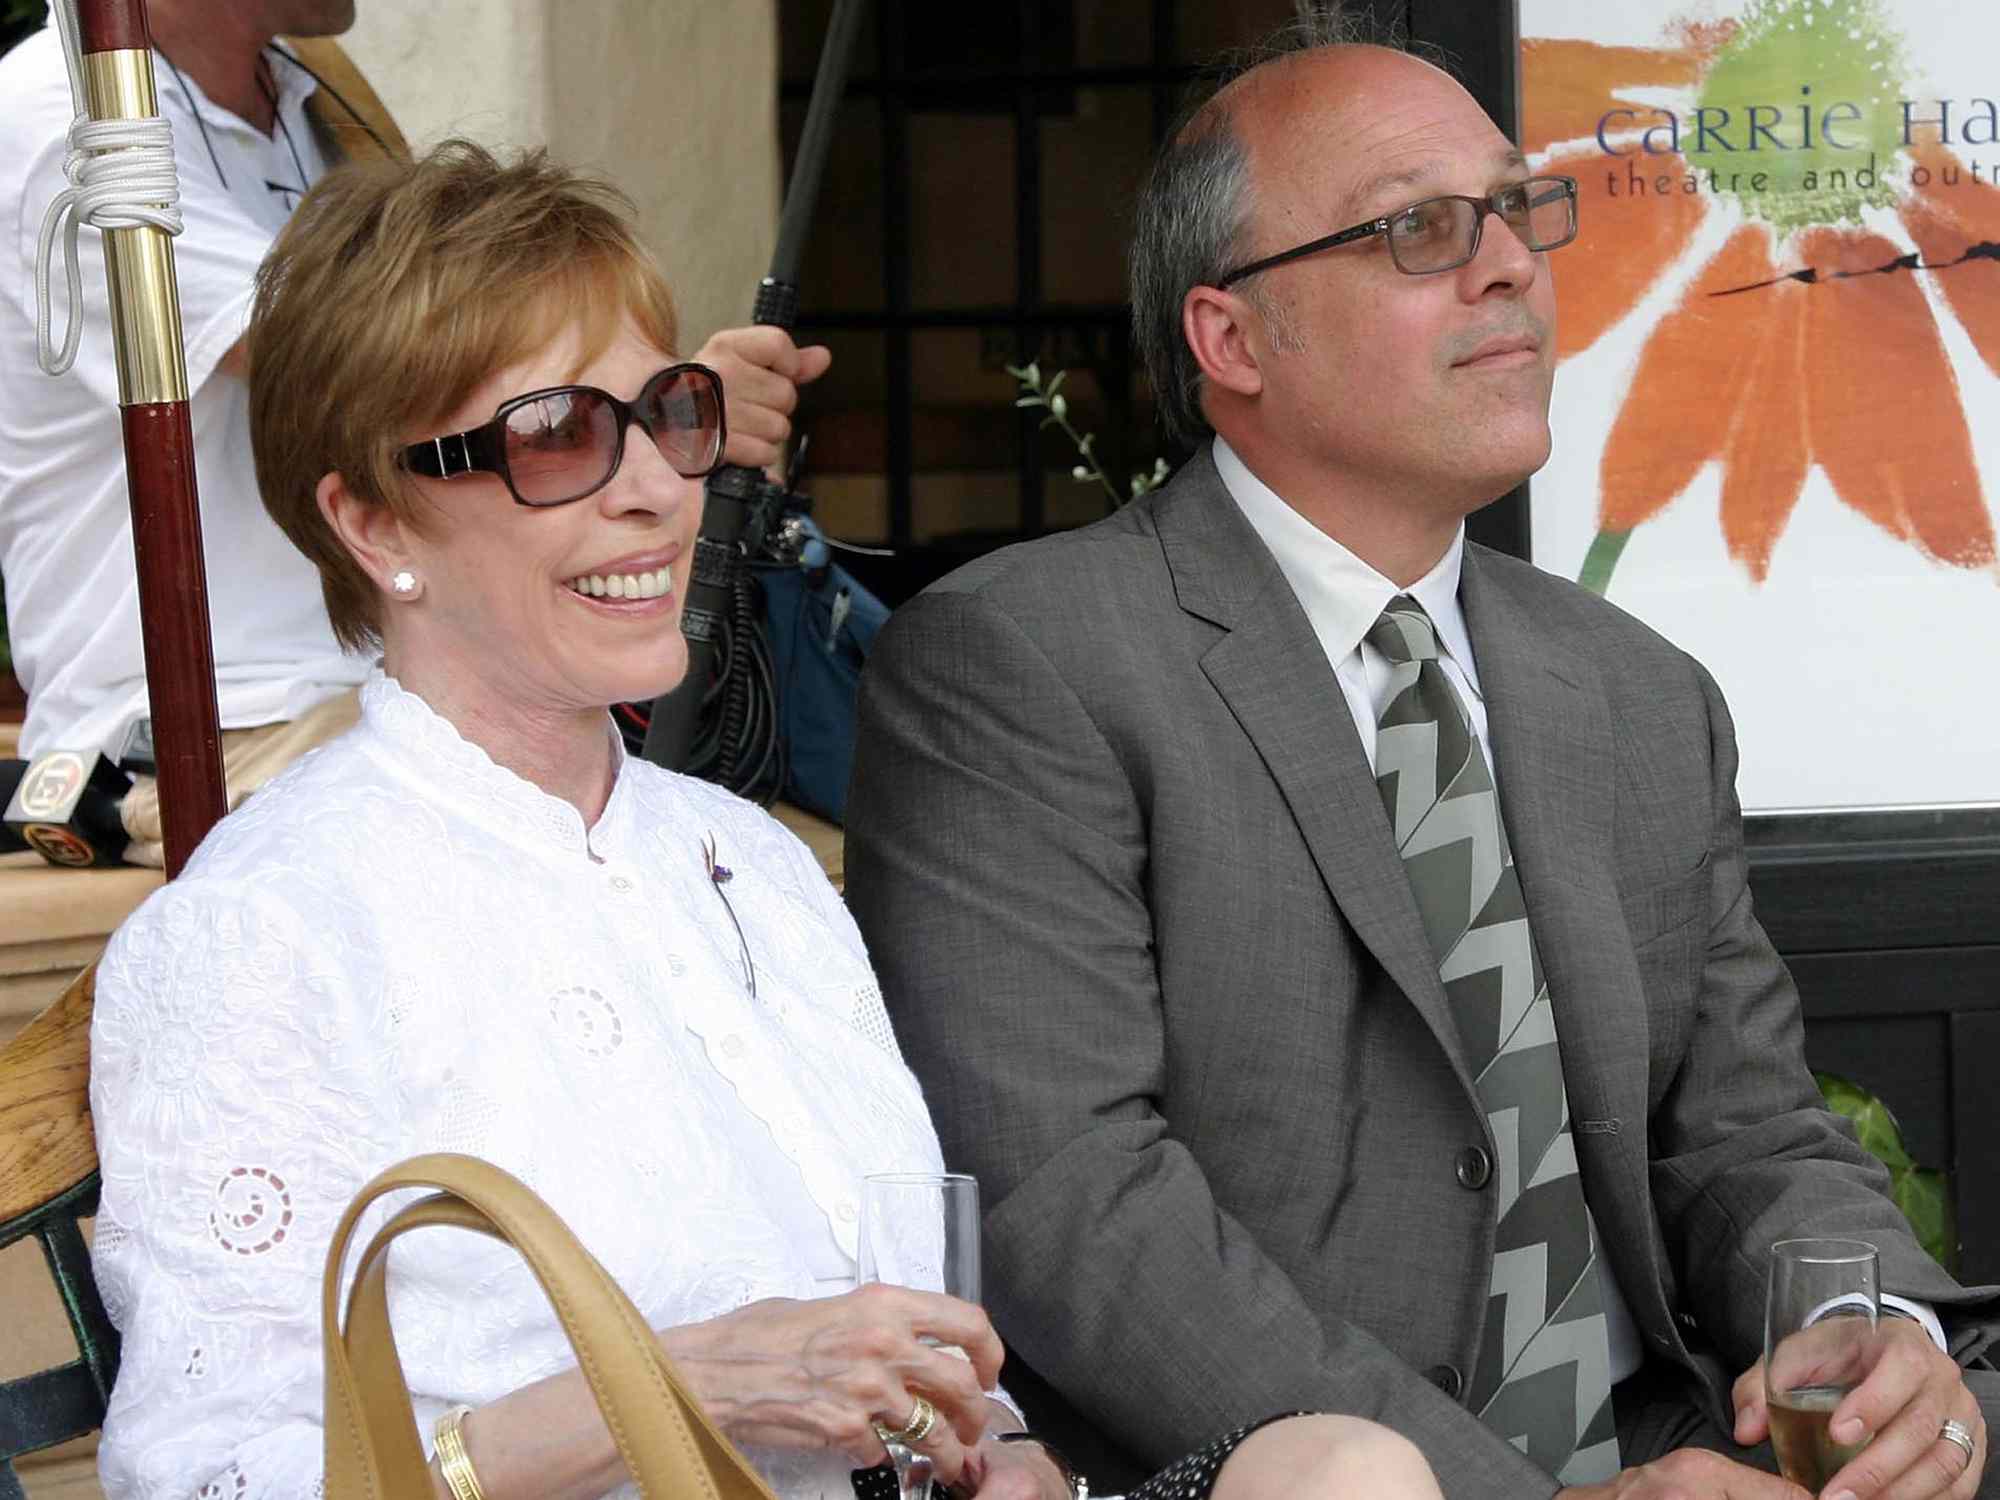 Carol Burnett and her husband Brian Miller attend the dedication ceremony for the Carrie Hamilton Theatre, formerly the Balcony Theatre, at the Pasadena Playhouse July 17, 2006 in Pasadena, California